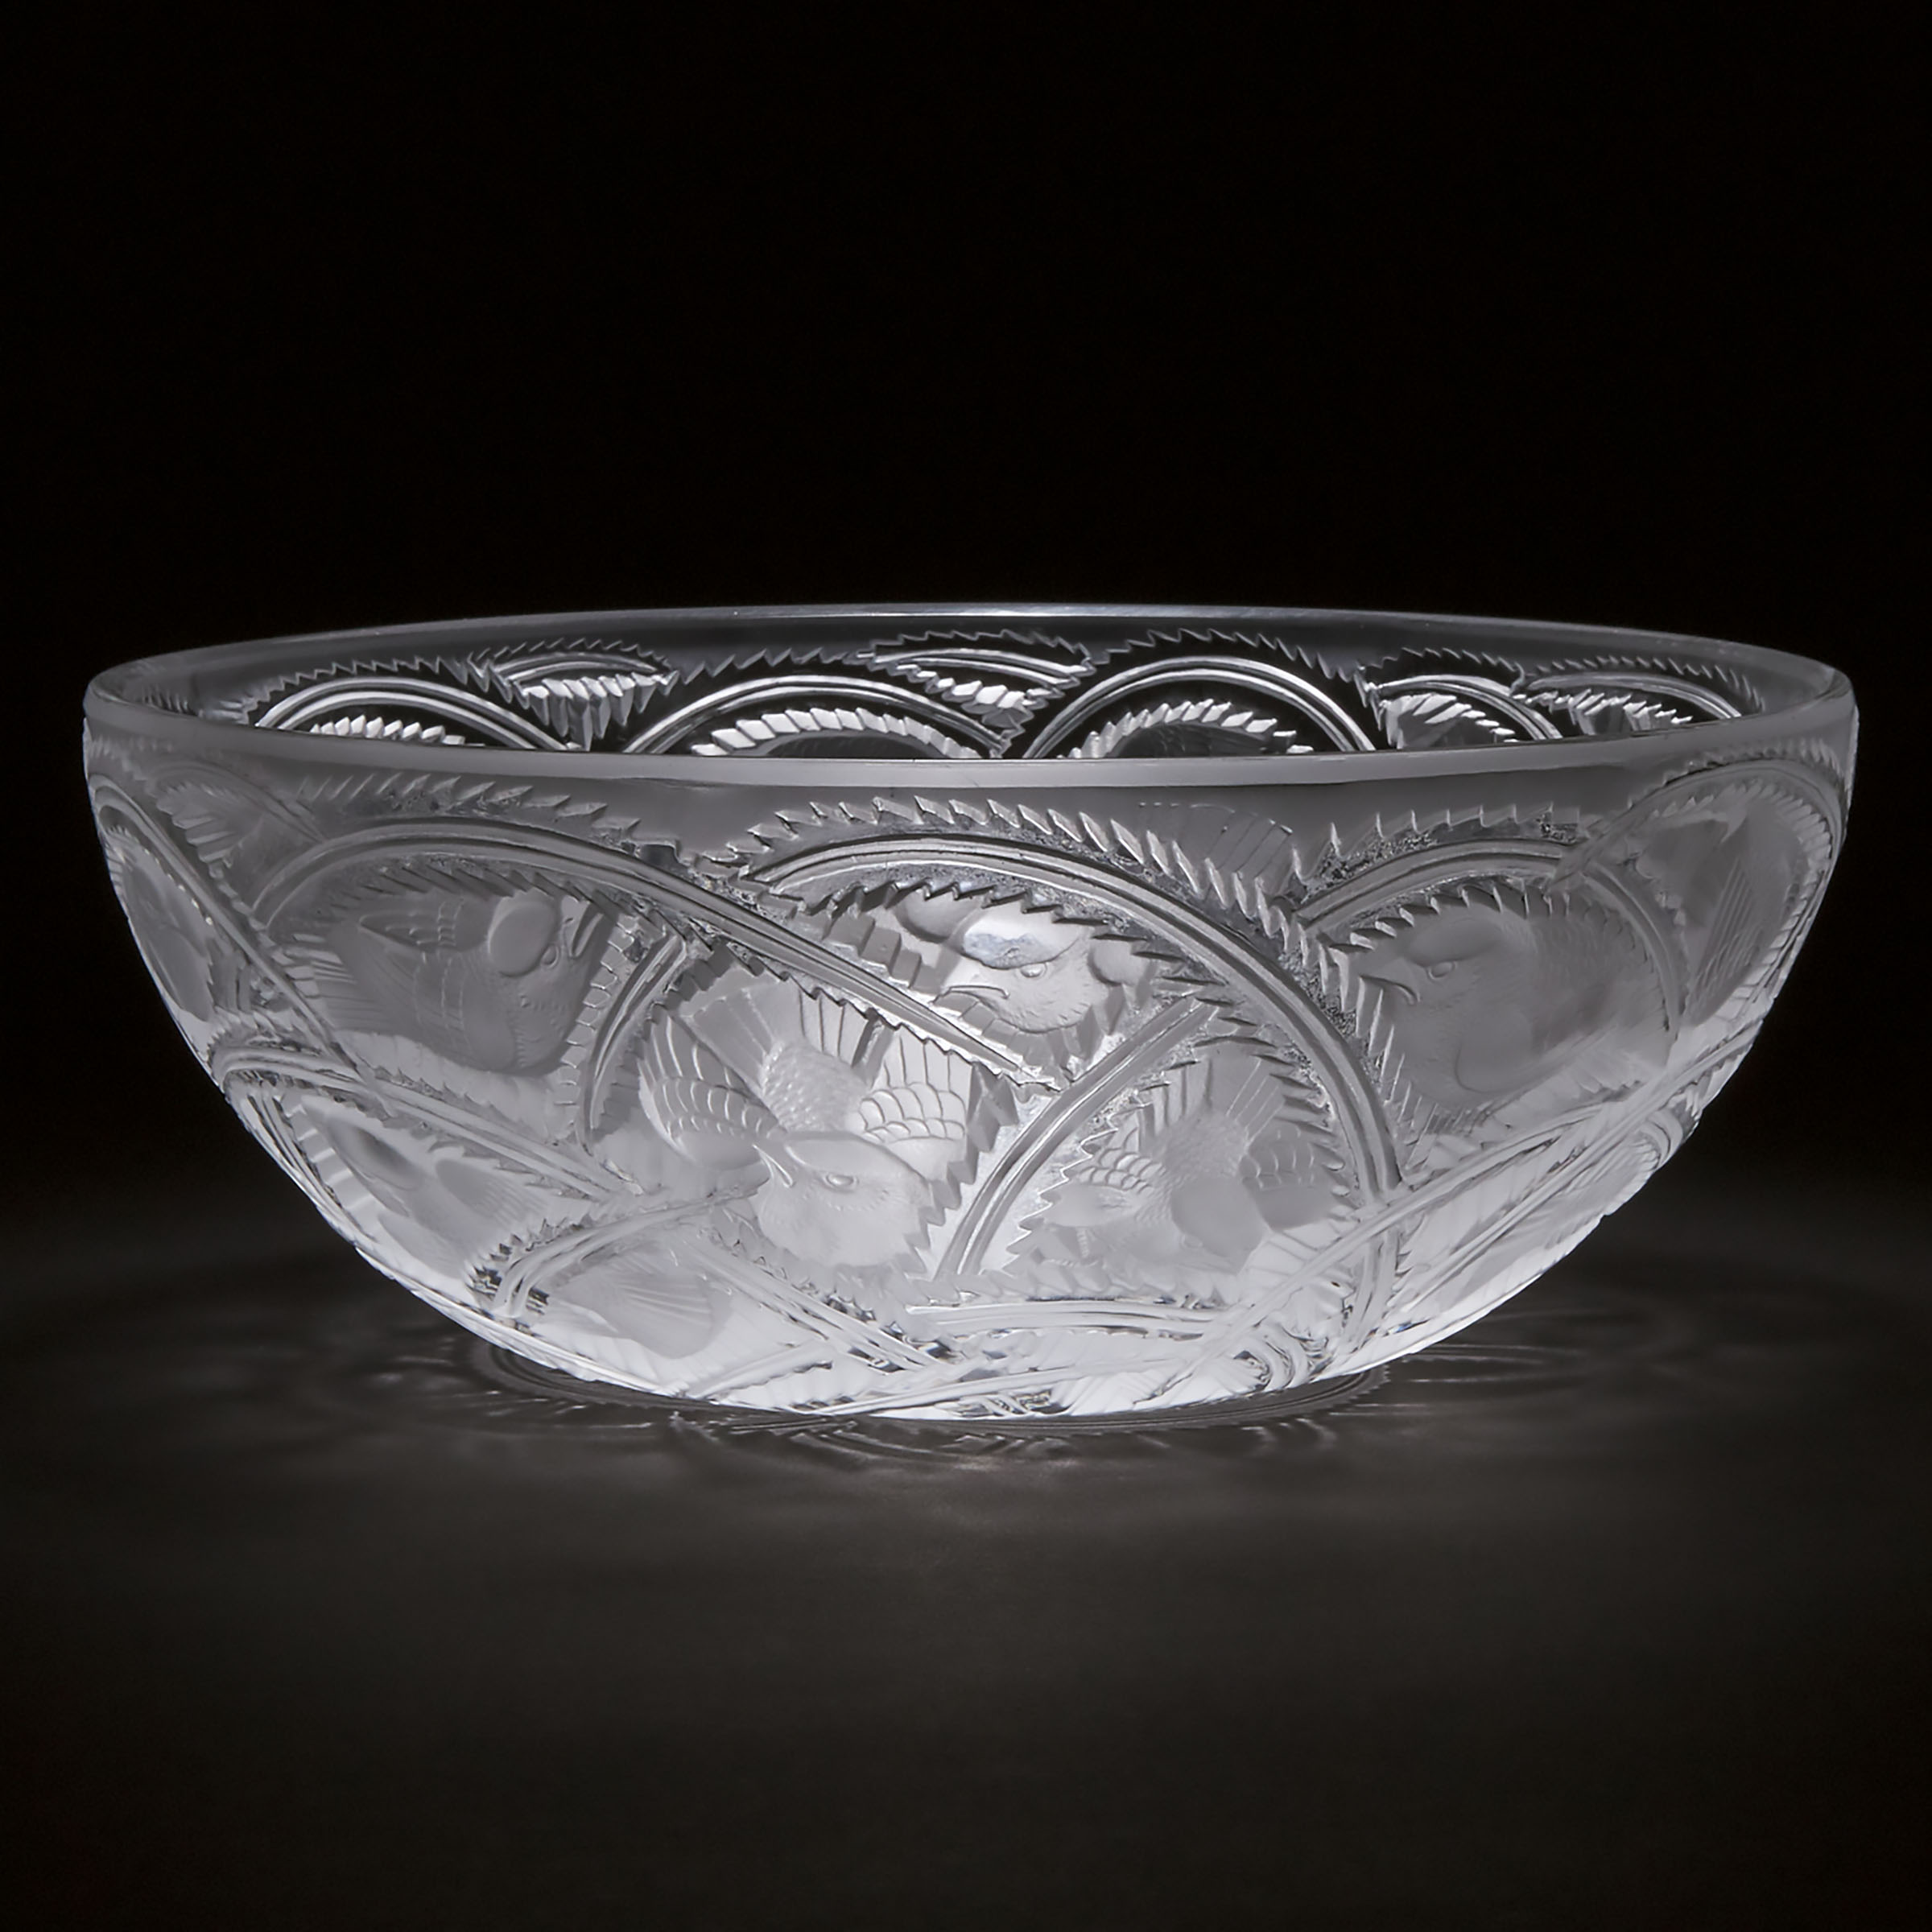 'Pinsons', Lalique Moulded and Partly Frosted Glass Bowl, post-1945